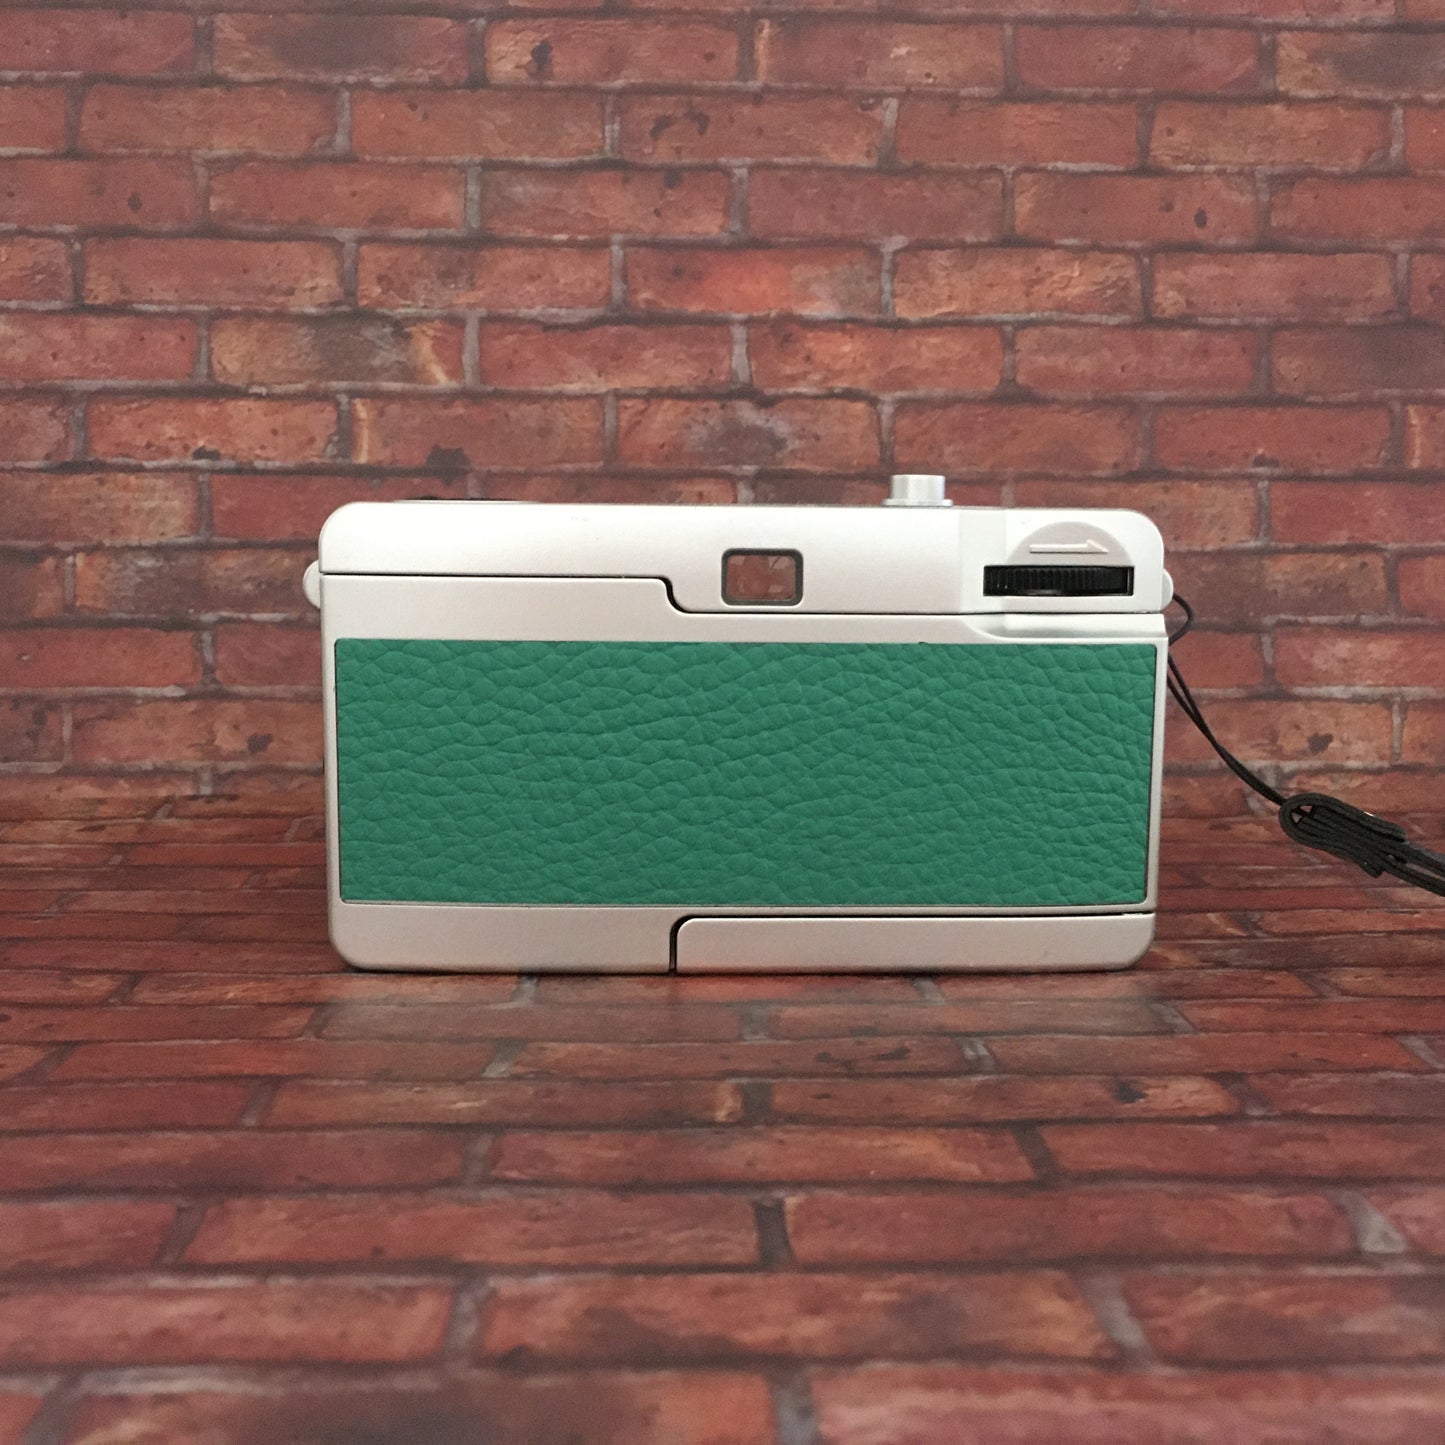 Point & shoot ! Brand new 35mm film camera with jade green leather